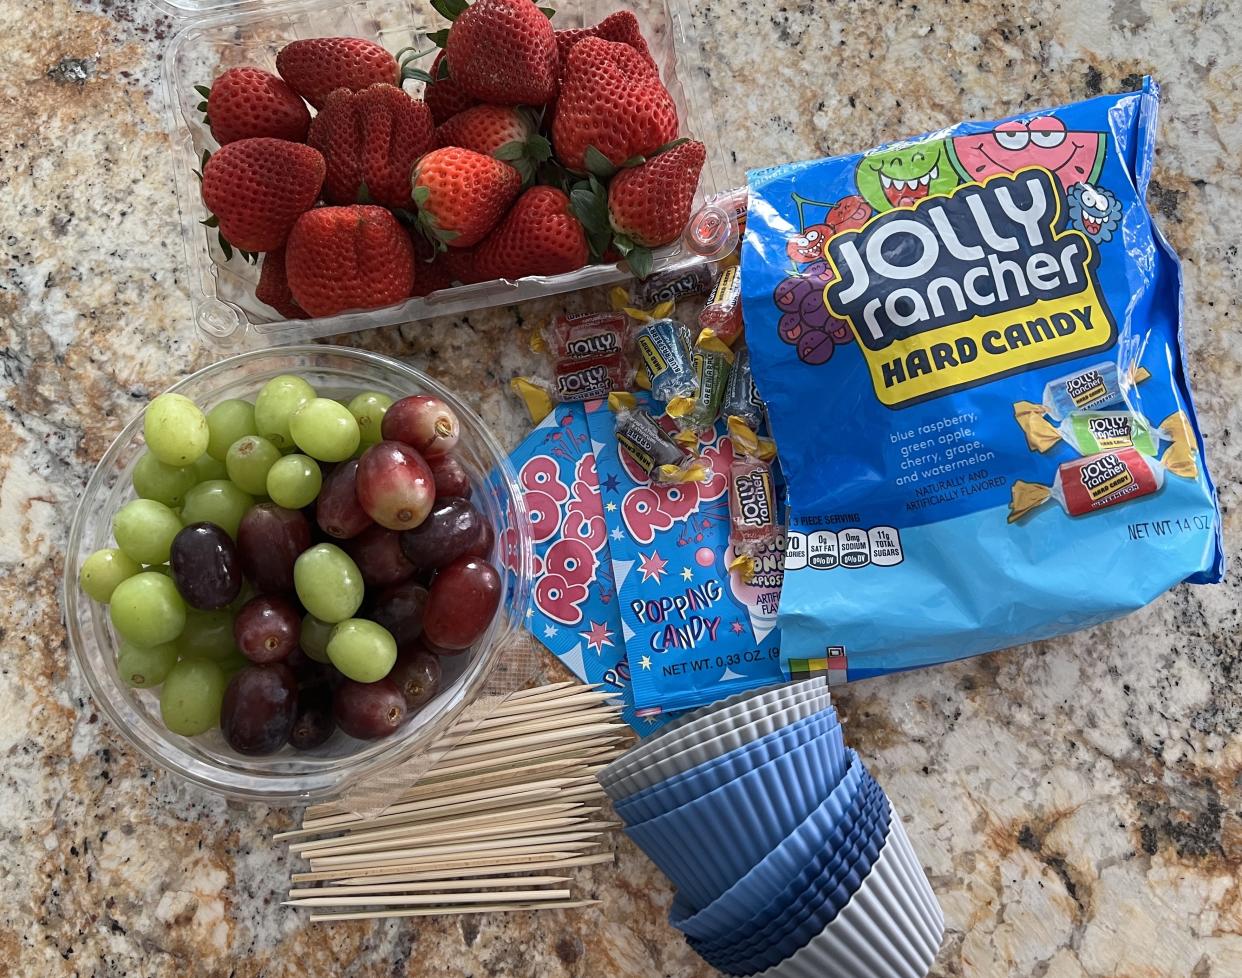 The ingredients for crack grapes: Jolly Rancher candies, Pop Rocks, grapes and strawberries. (Photo: Terri Peters)